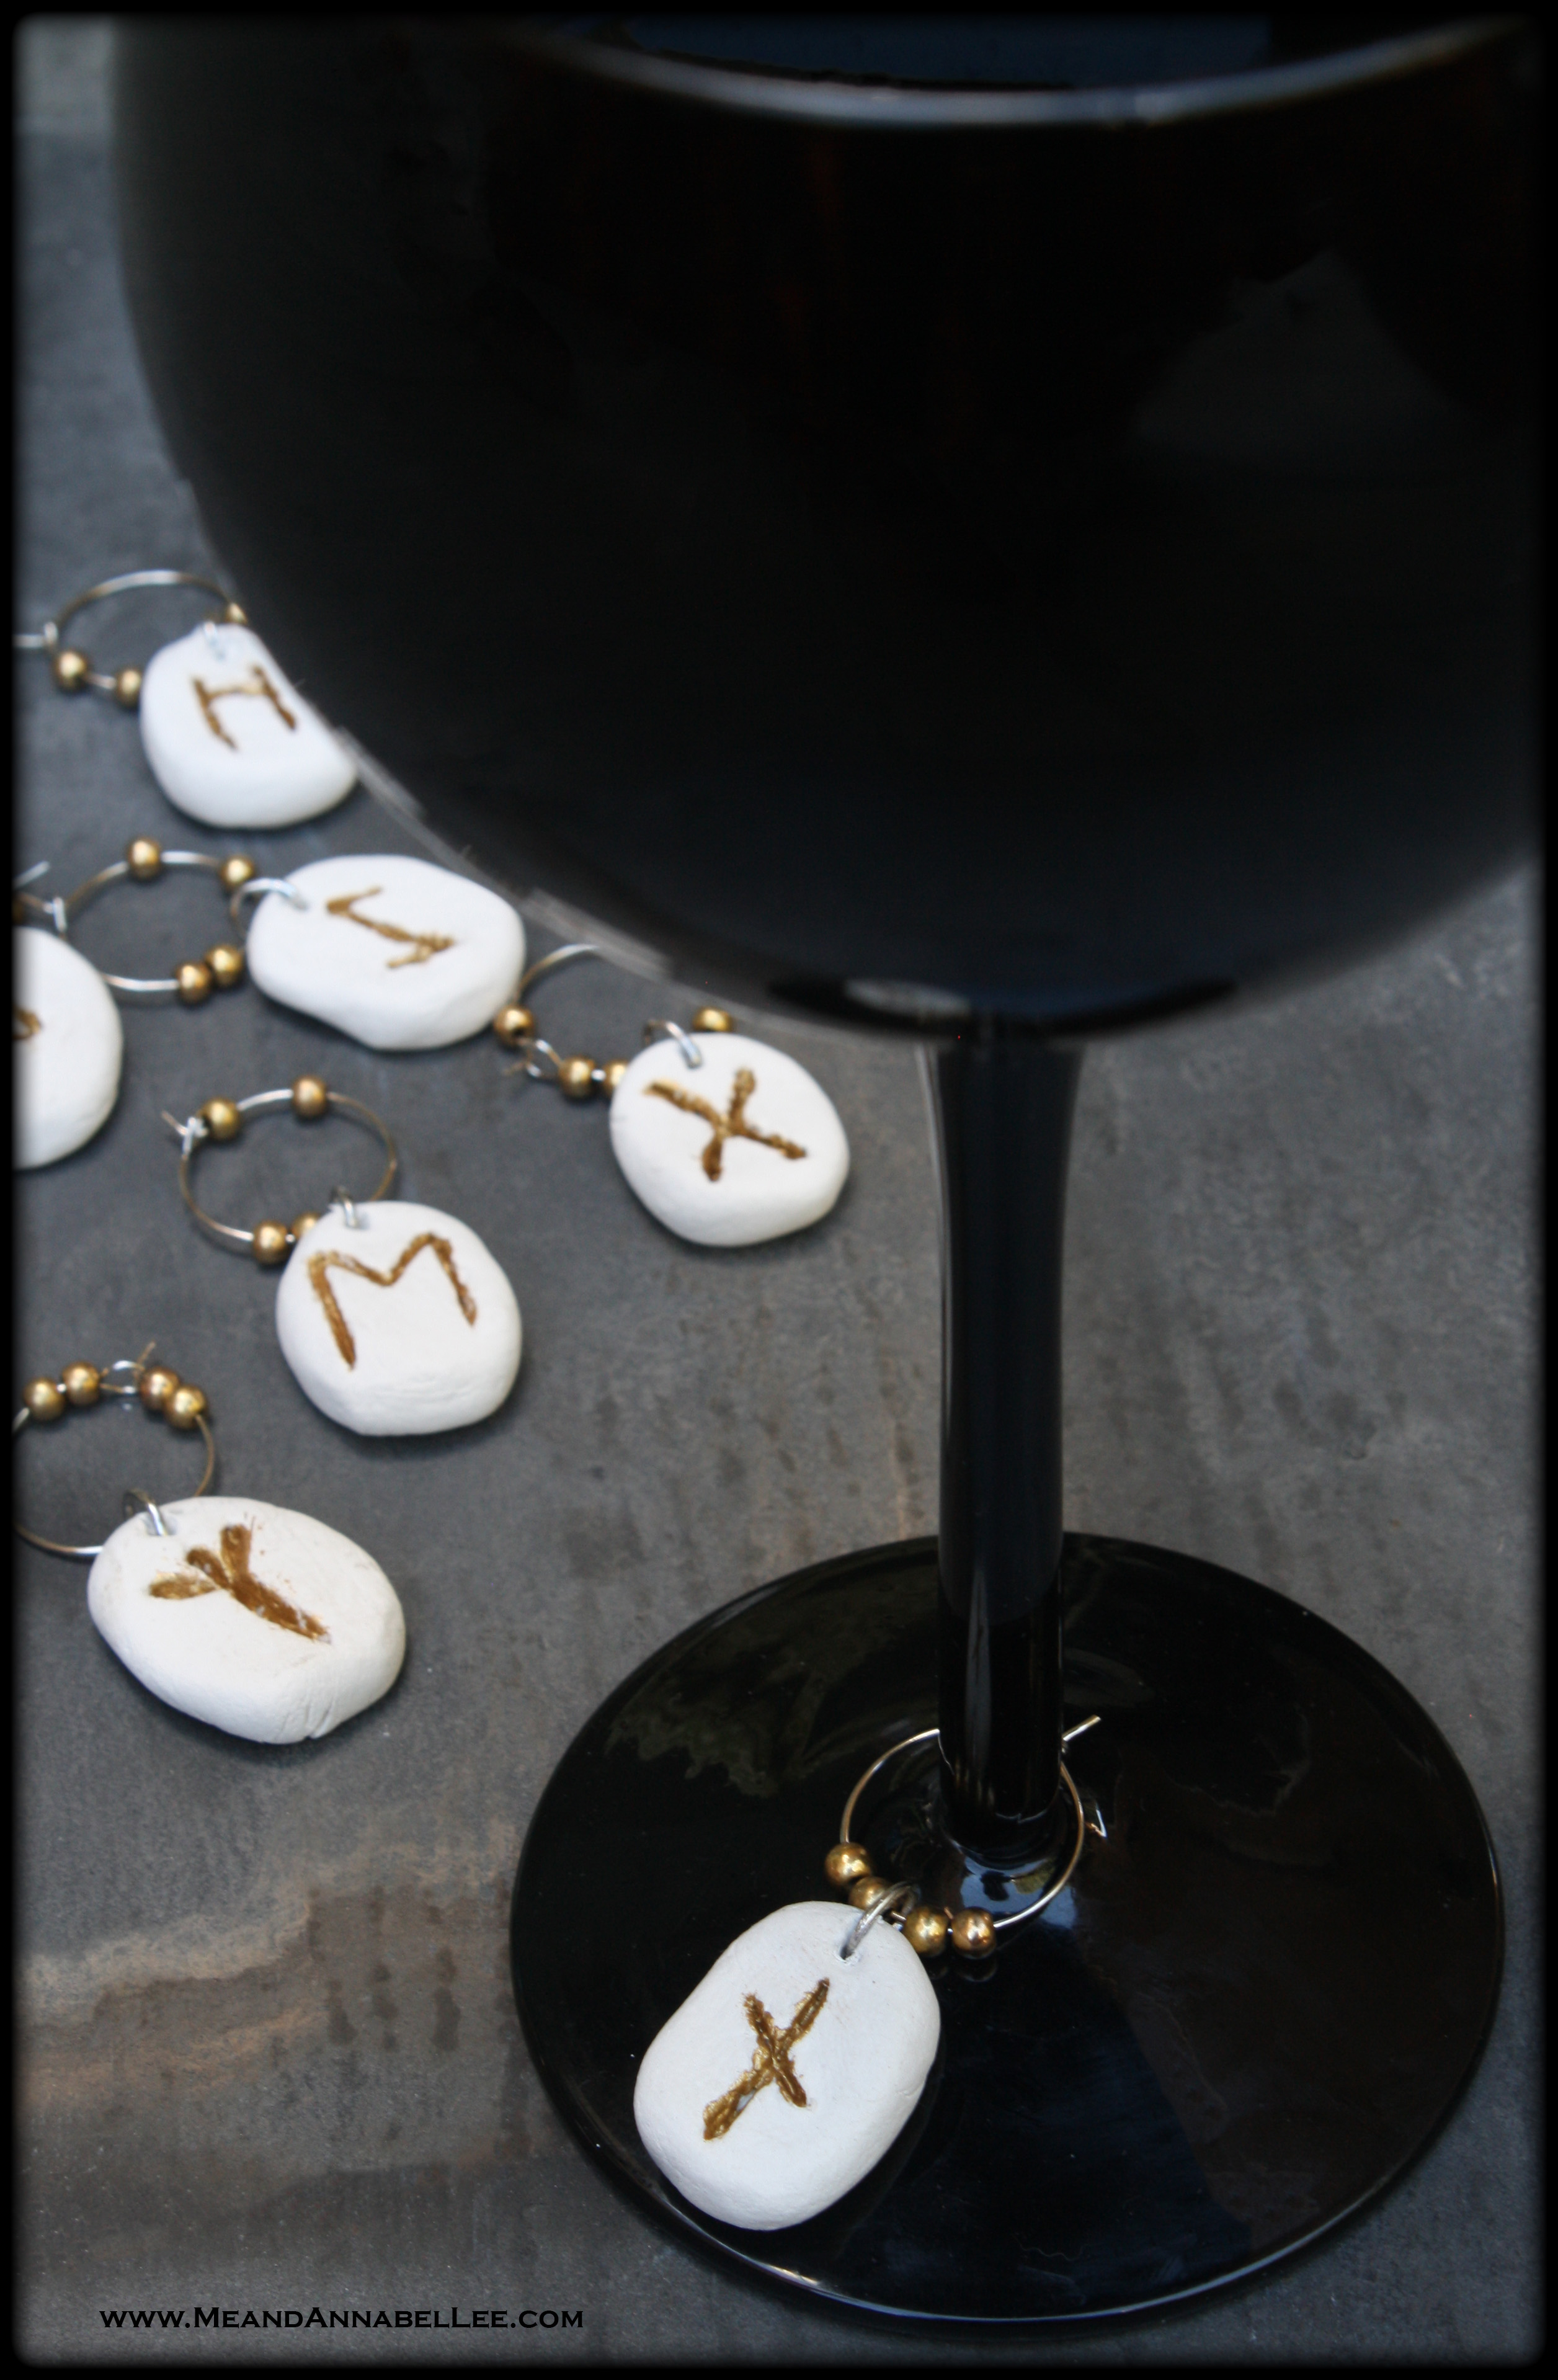 DIY Rune Stone Wine Glass Charms | Pagan Divination Tools | Witches Halloween Party | Paper Clay | Runic Alphabet | www.MeandAnnabelLee.com